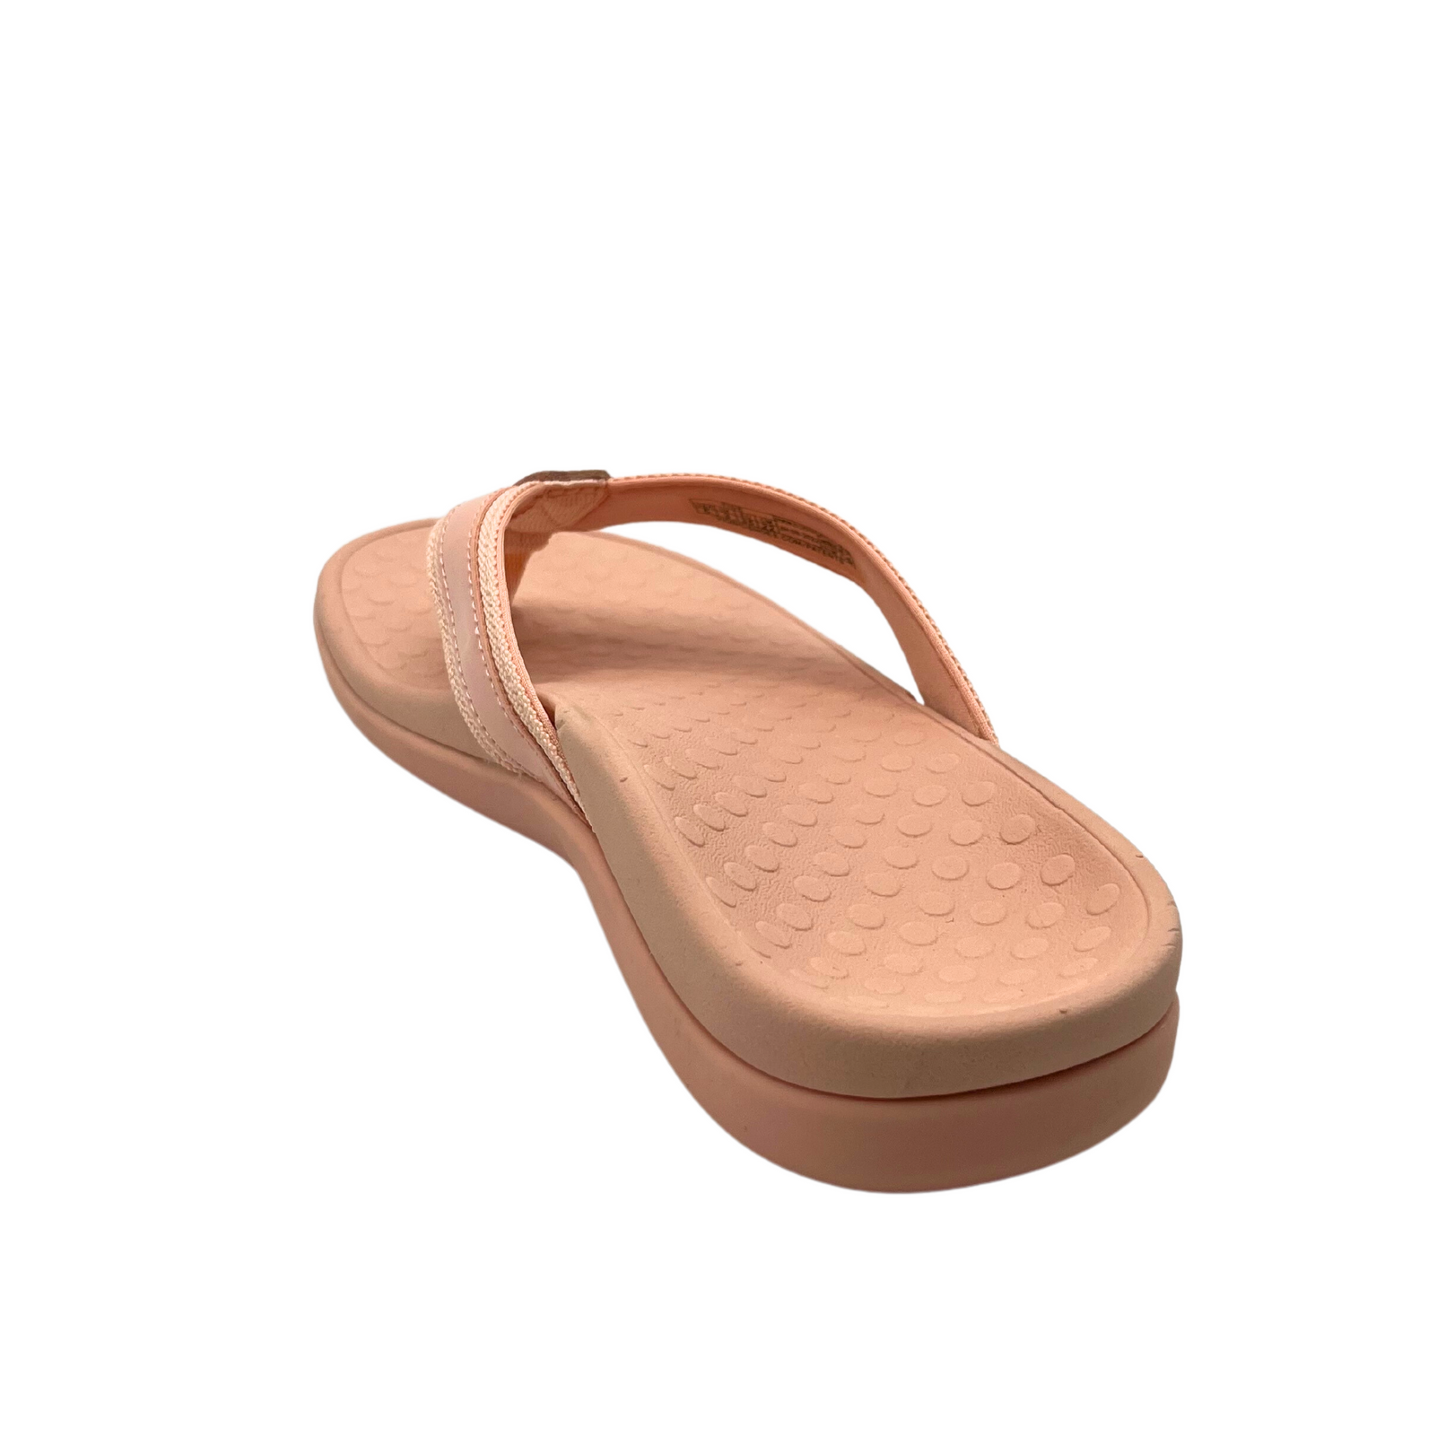 Angled rear view of a flip flop sandal shown in a rose color.  Nicely contoured footbed for support and stability